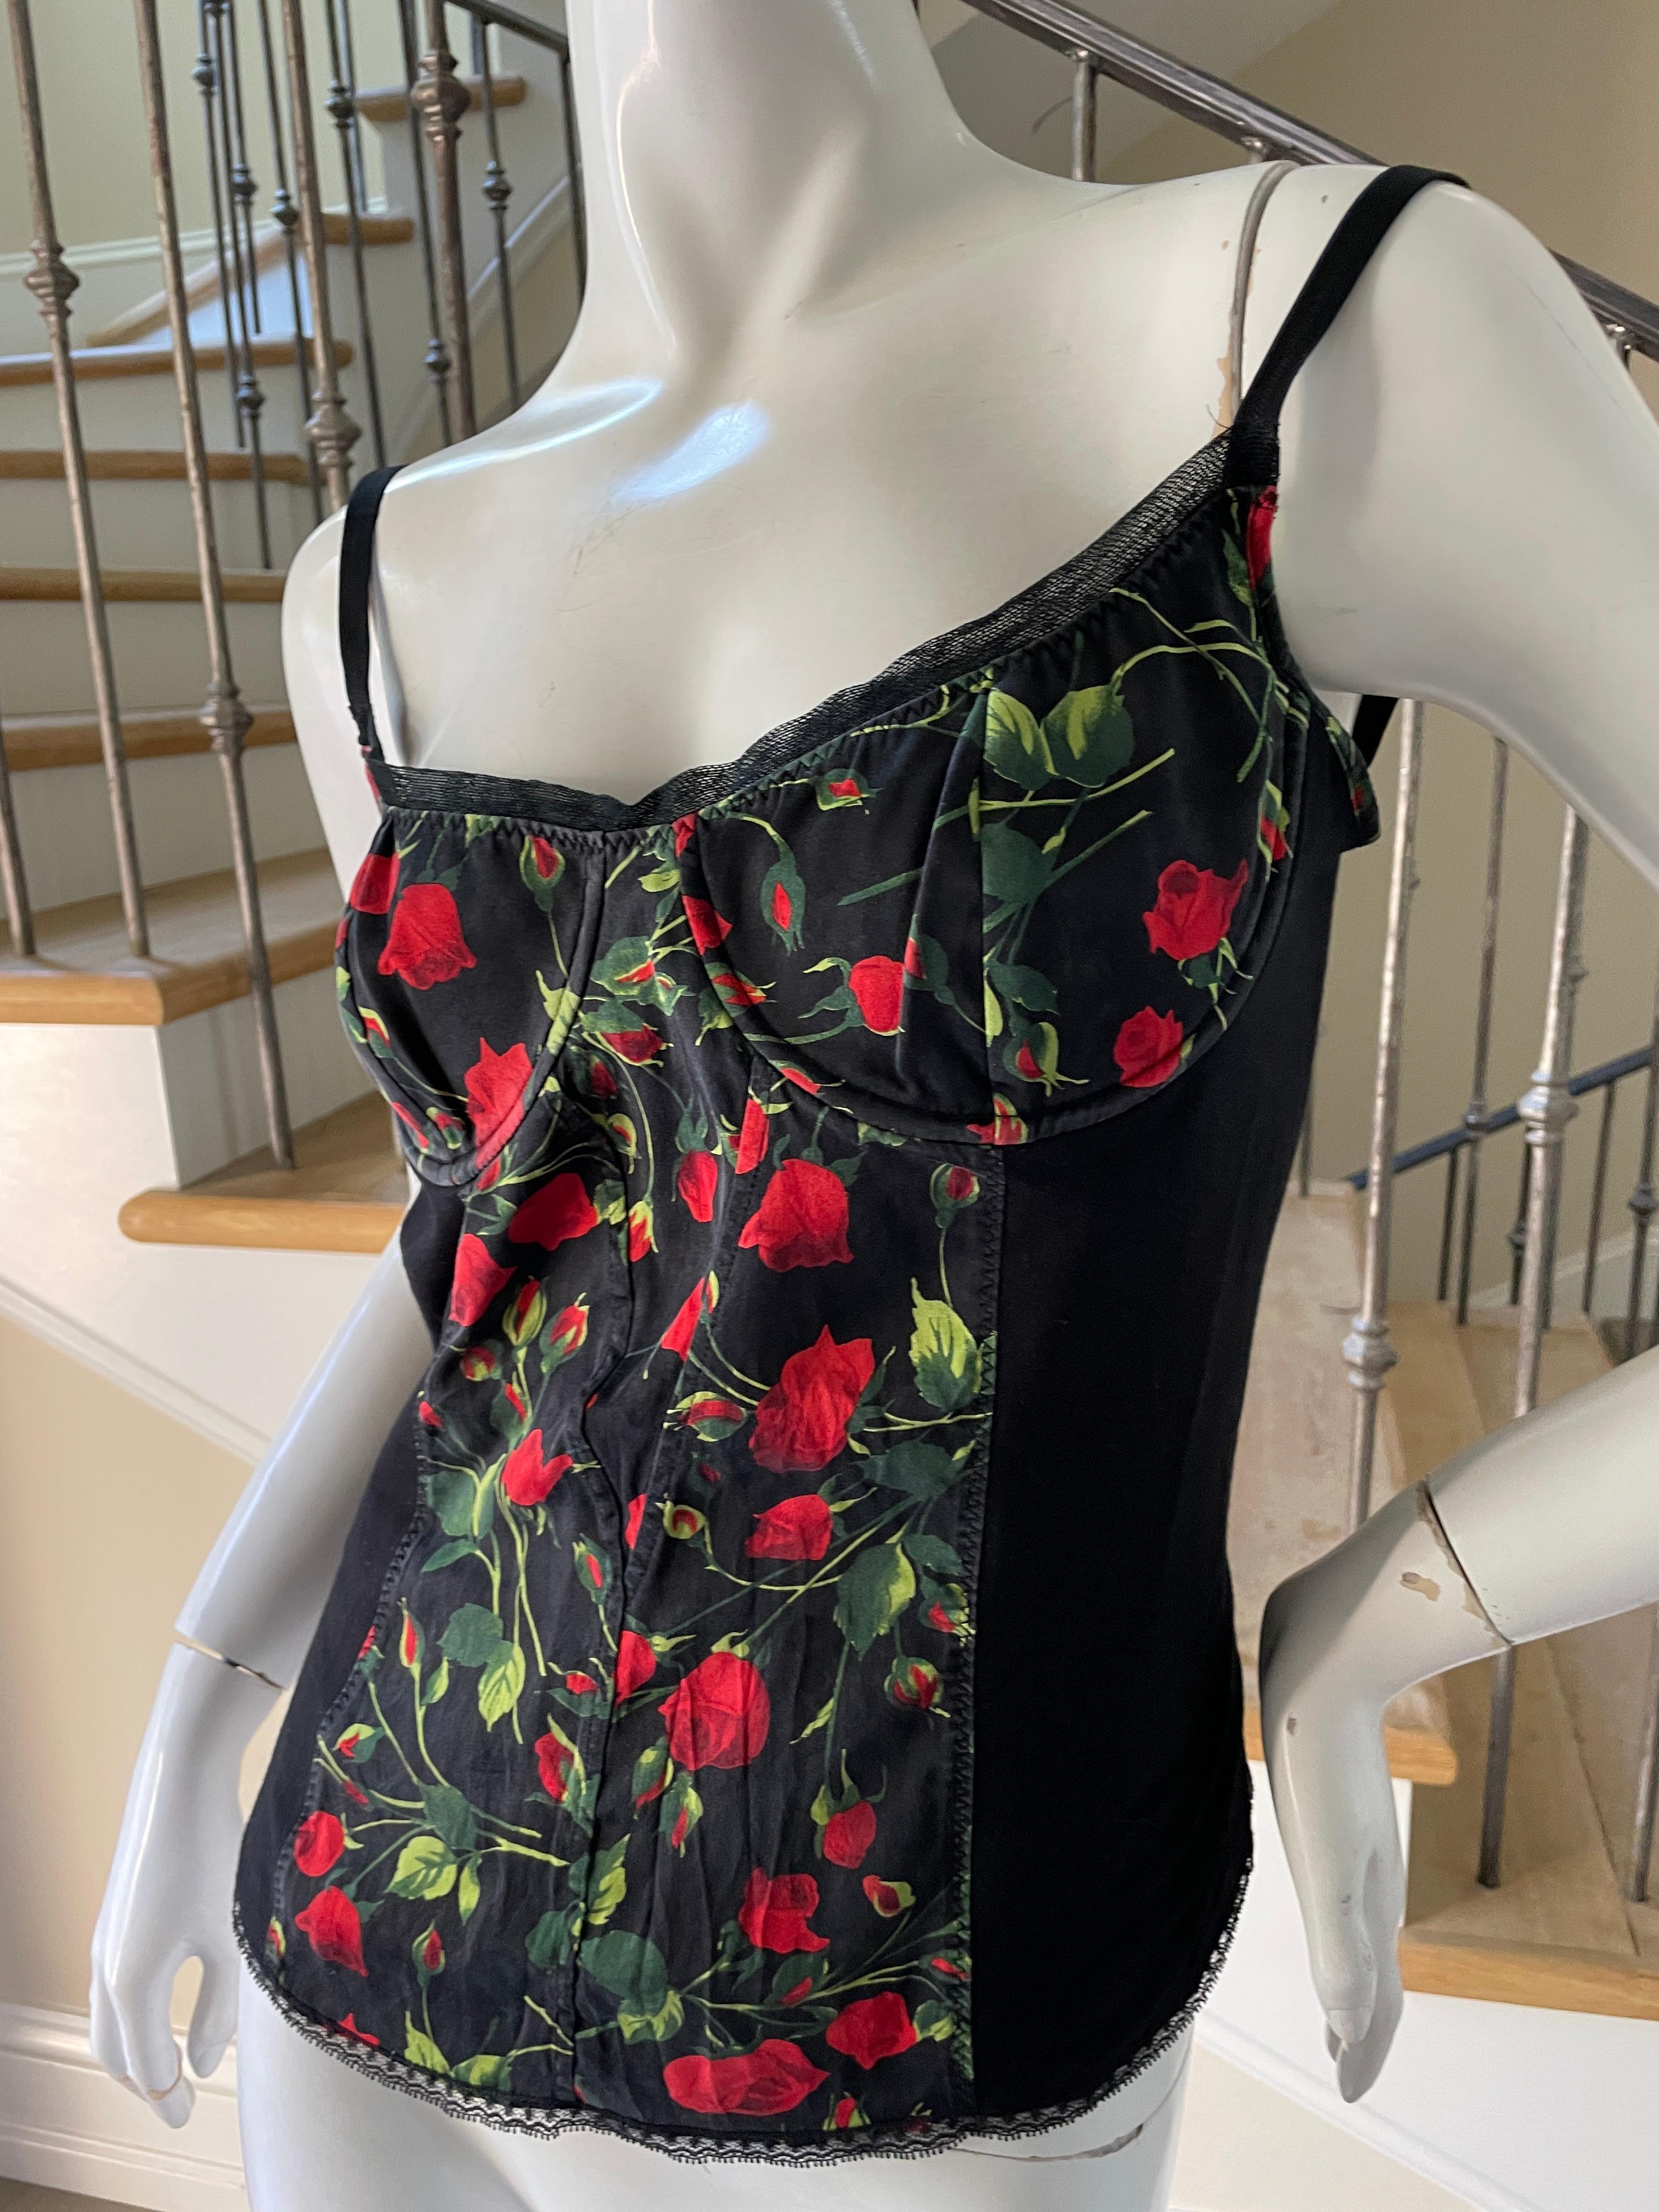 Dolce & Gabbana for D&G Vintage Cherry Print Corset Tank Top with Underwire Bra 1